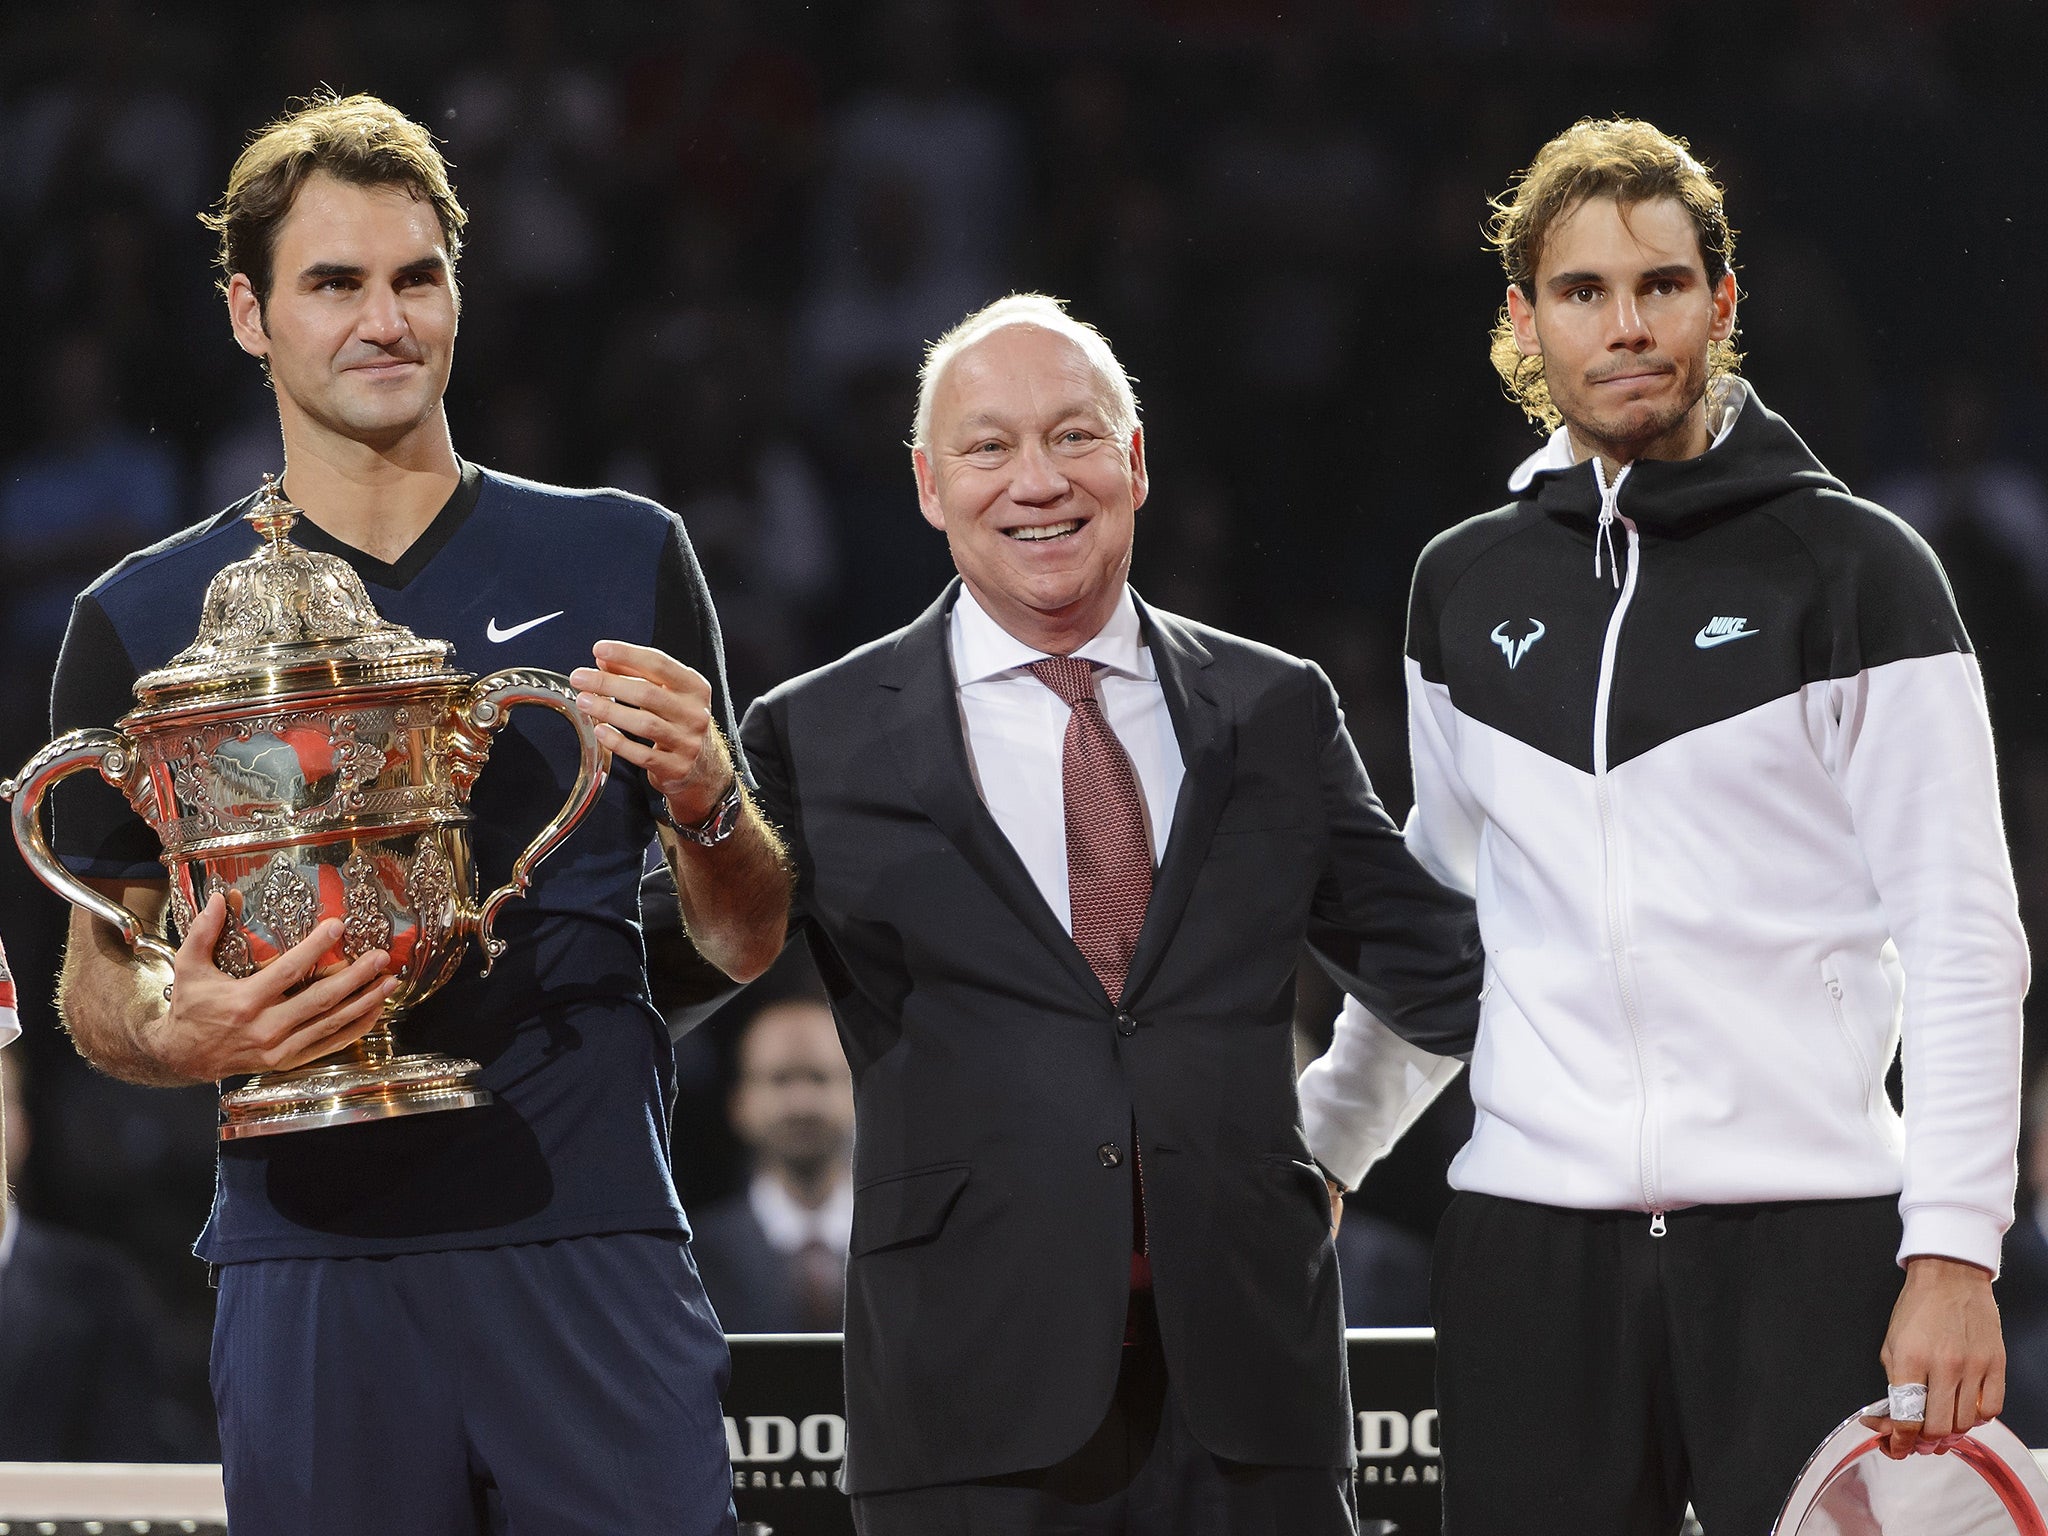 What will happen when the likes of Roger Federer and Rafa Nadal finally retire?